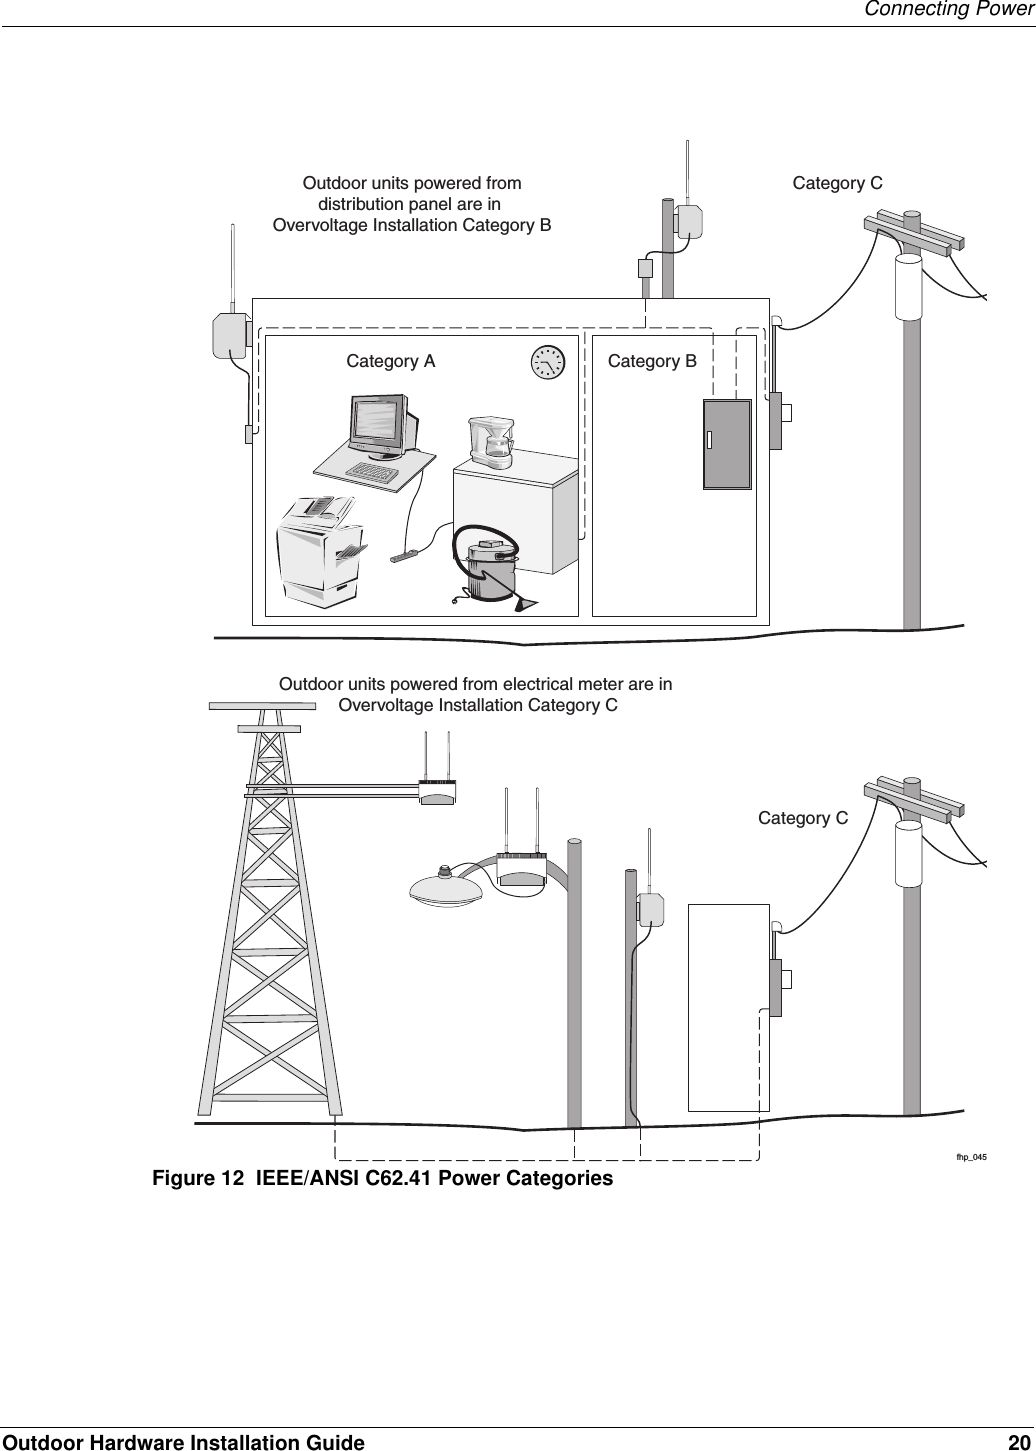 Connecting PowerOutdoor Hardware Installation Guide 20Figure 12  IEEE/ANSI C62.41 Power Categoriesfhp_045Category A Category BOutdoor units powered fromdistribution panel are in Overvoltage Installation Category BCategory COutdoor units powered from electrical meter are in Overvoltage Installation Category CCategory C